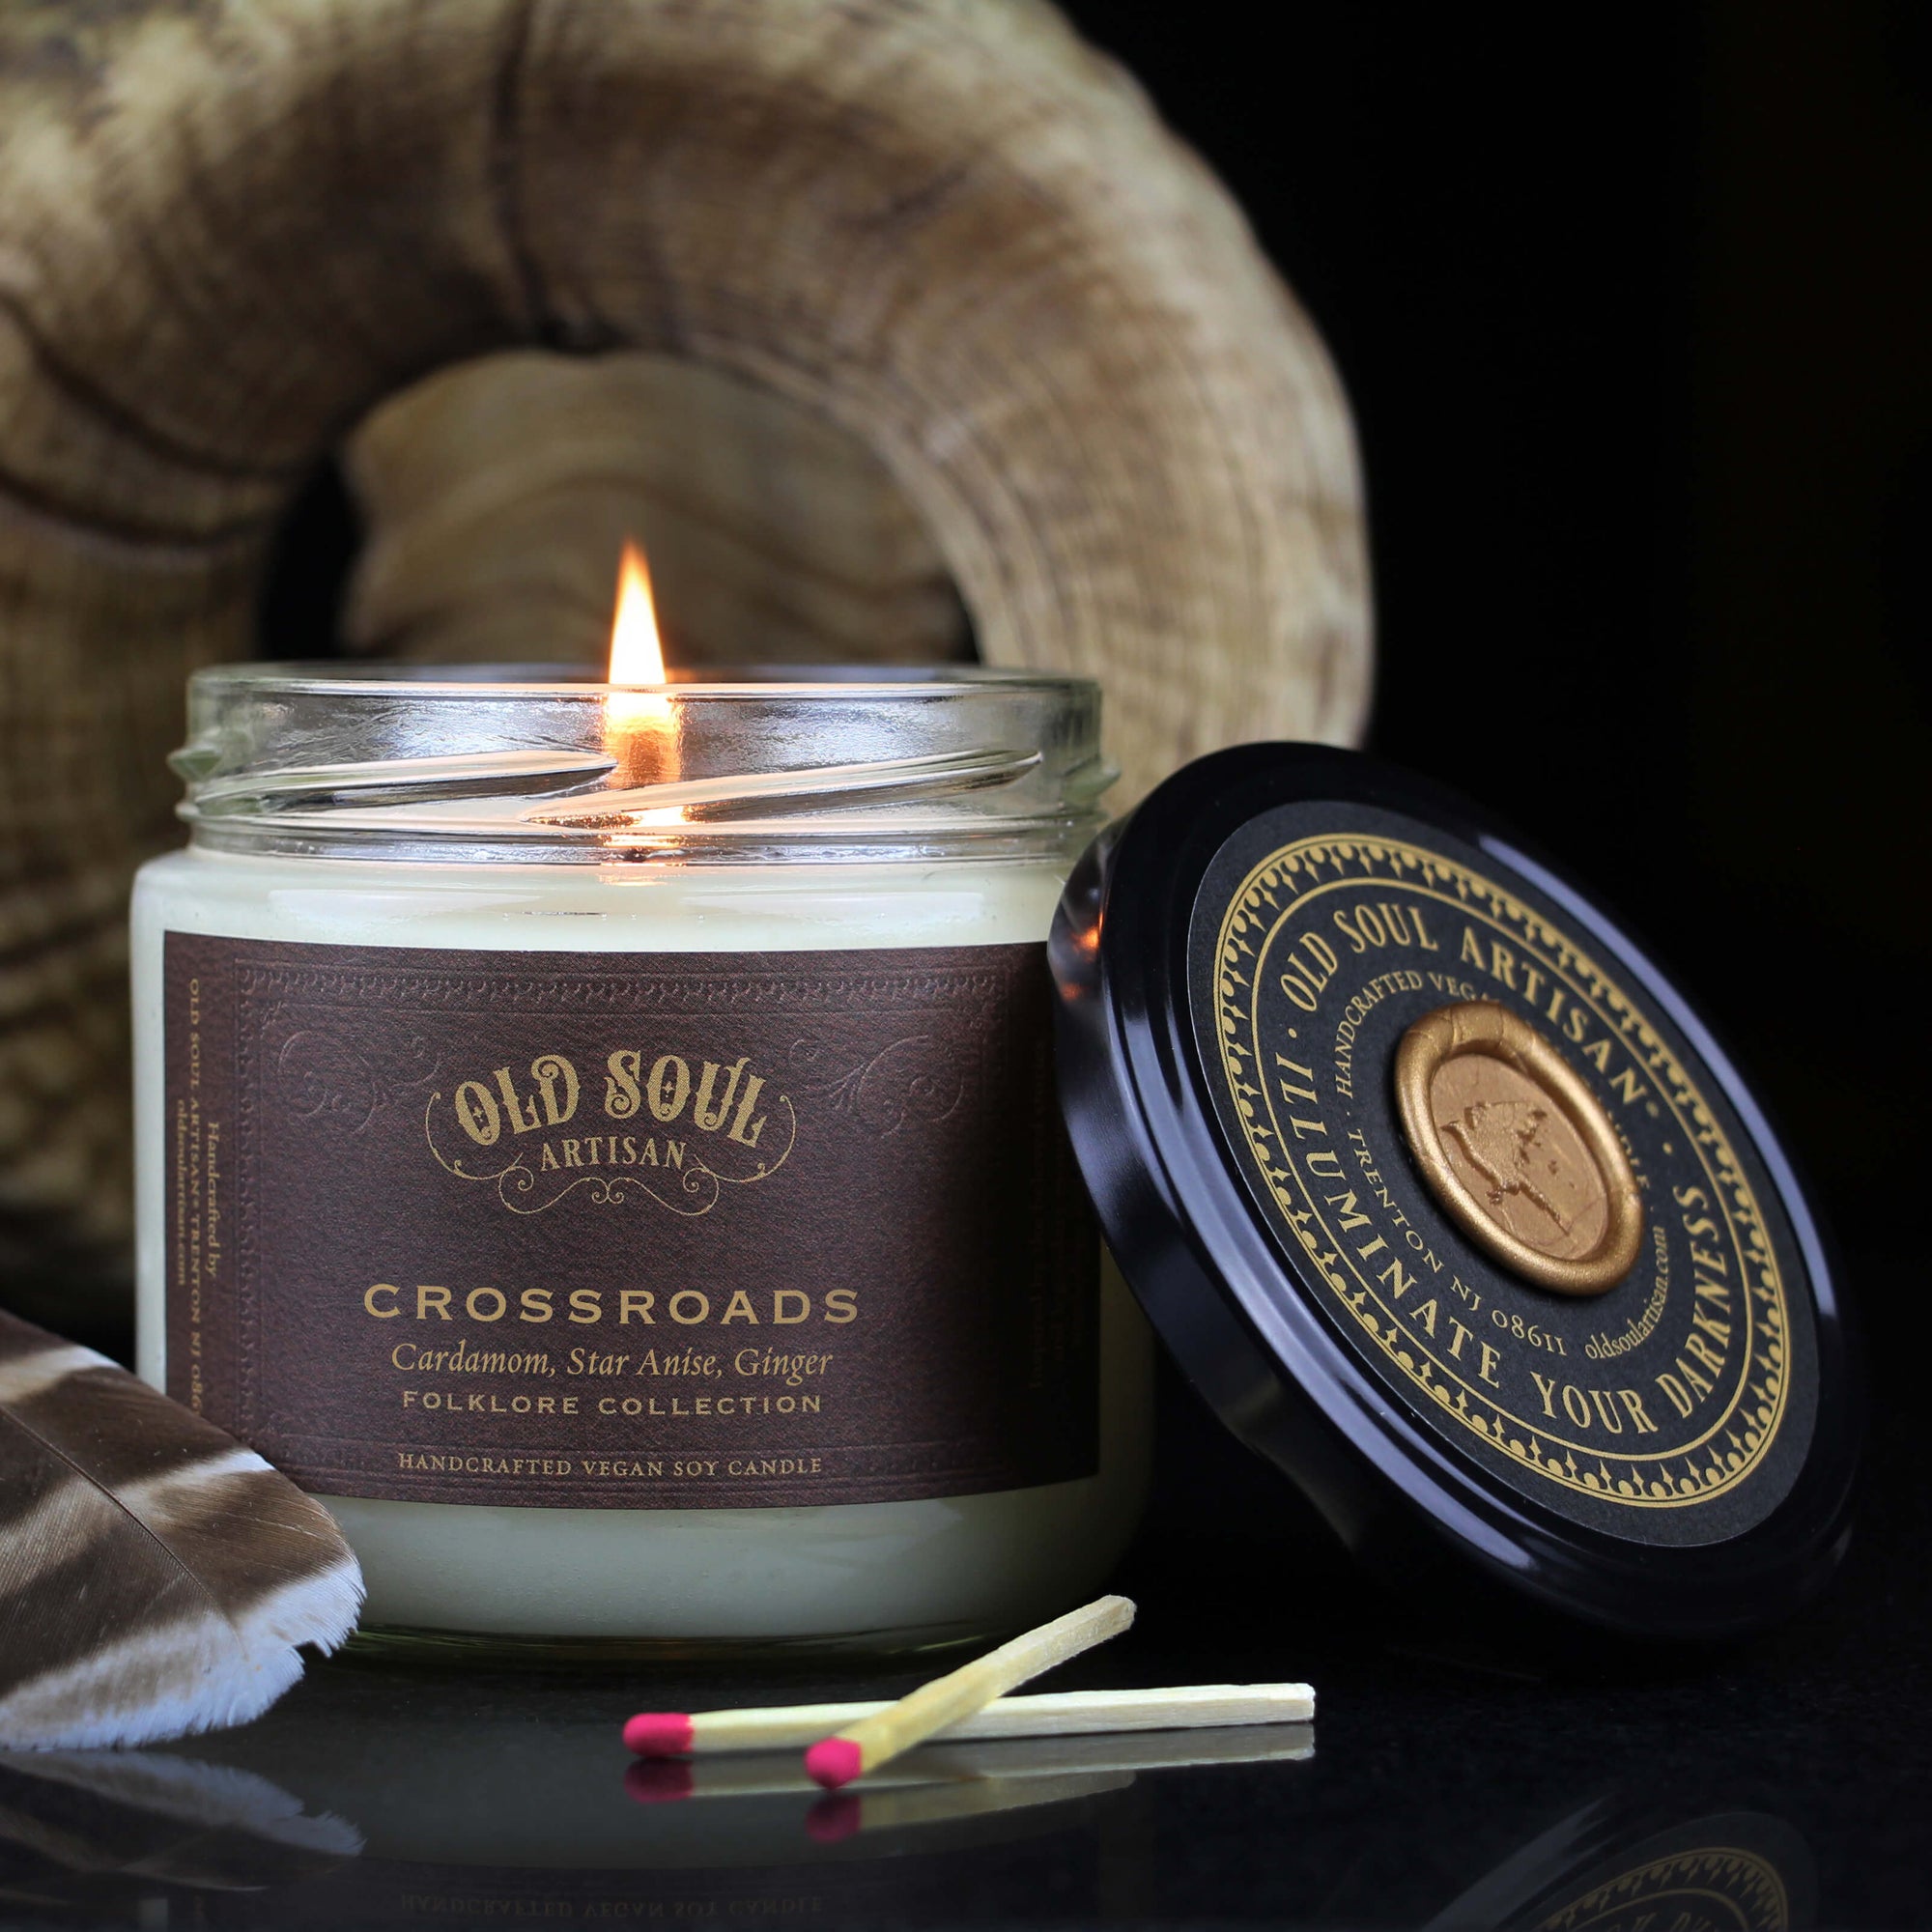 Crossroads soy candle